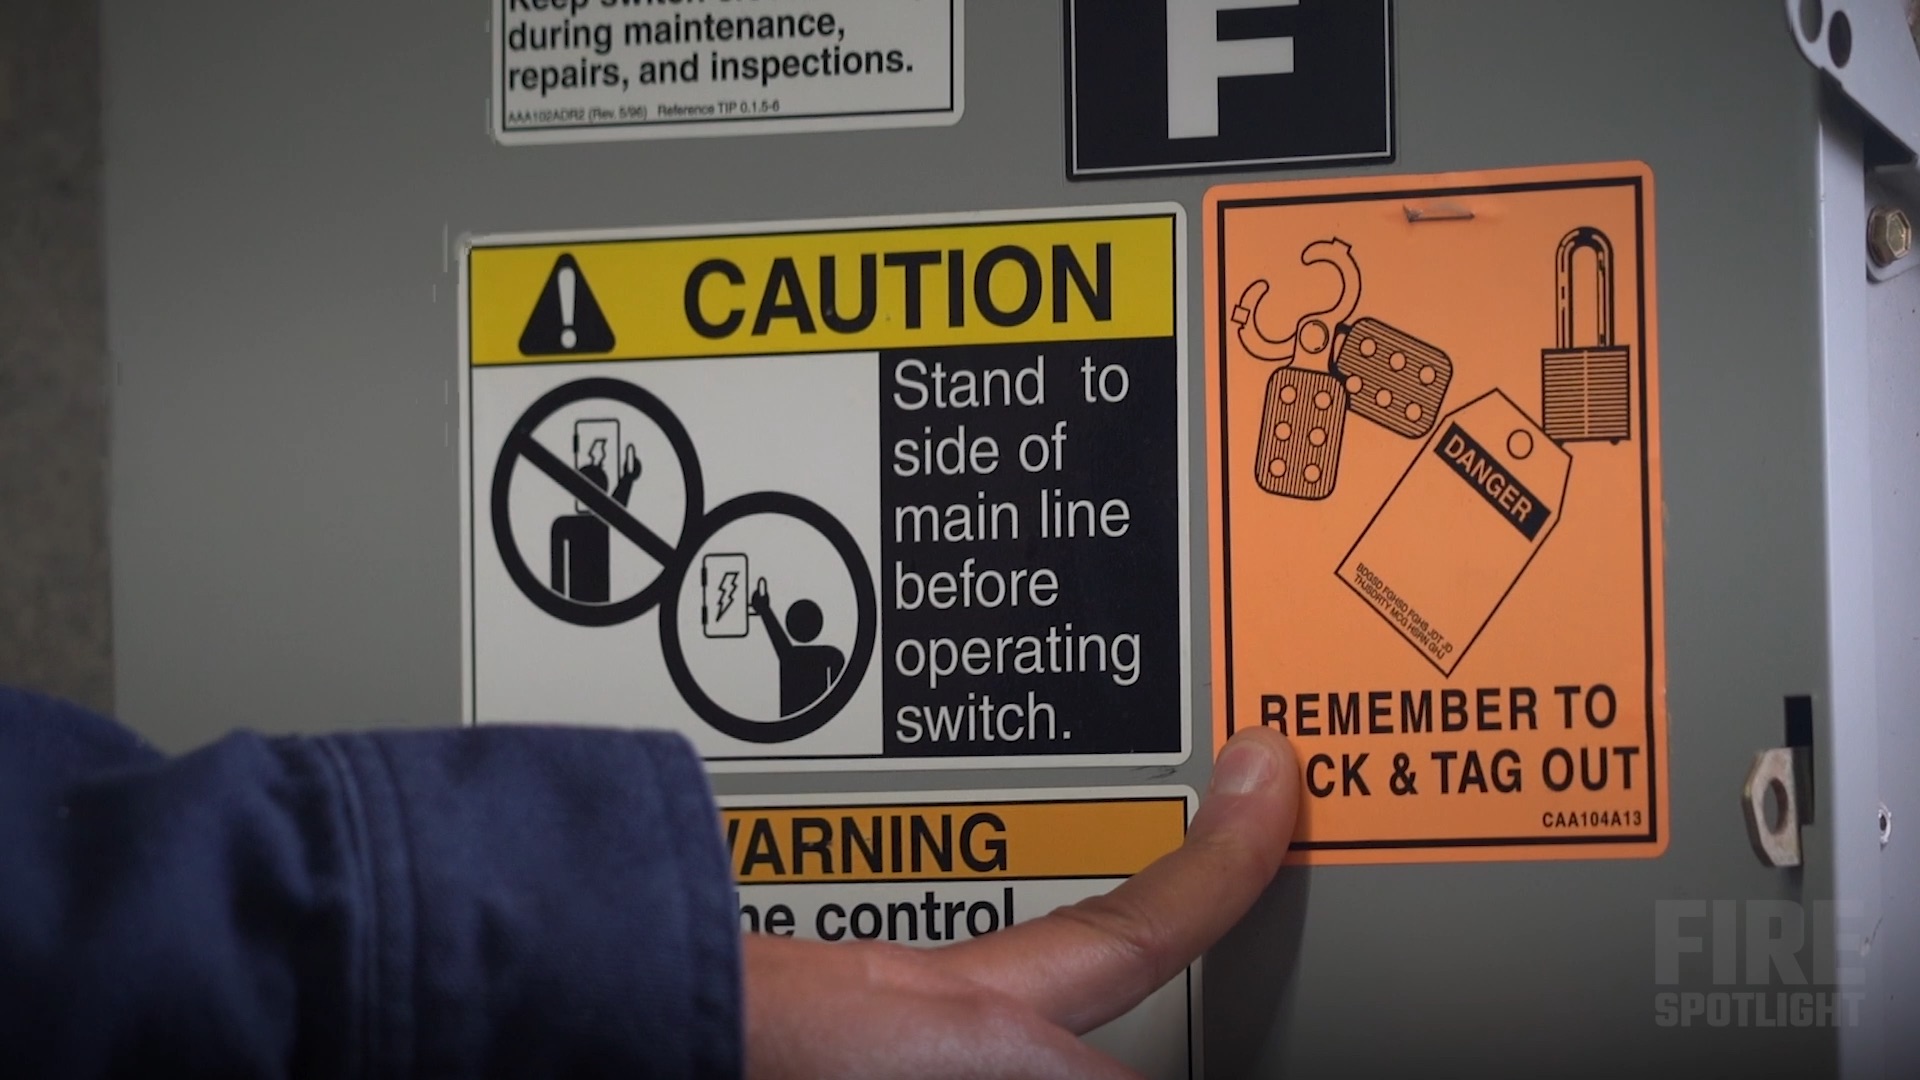 Featured image for “Elevator Electrical Code | Elevator Training Courses | Elevator Rescue Training Video”